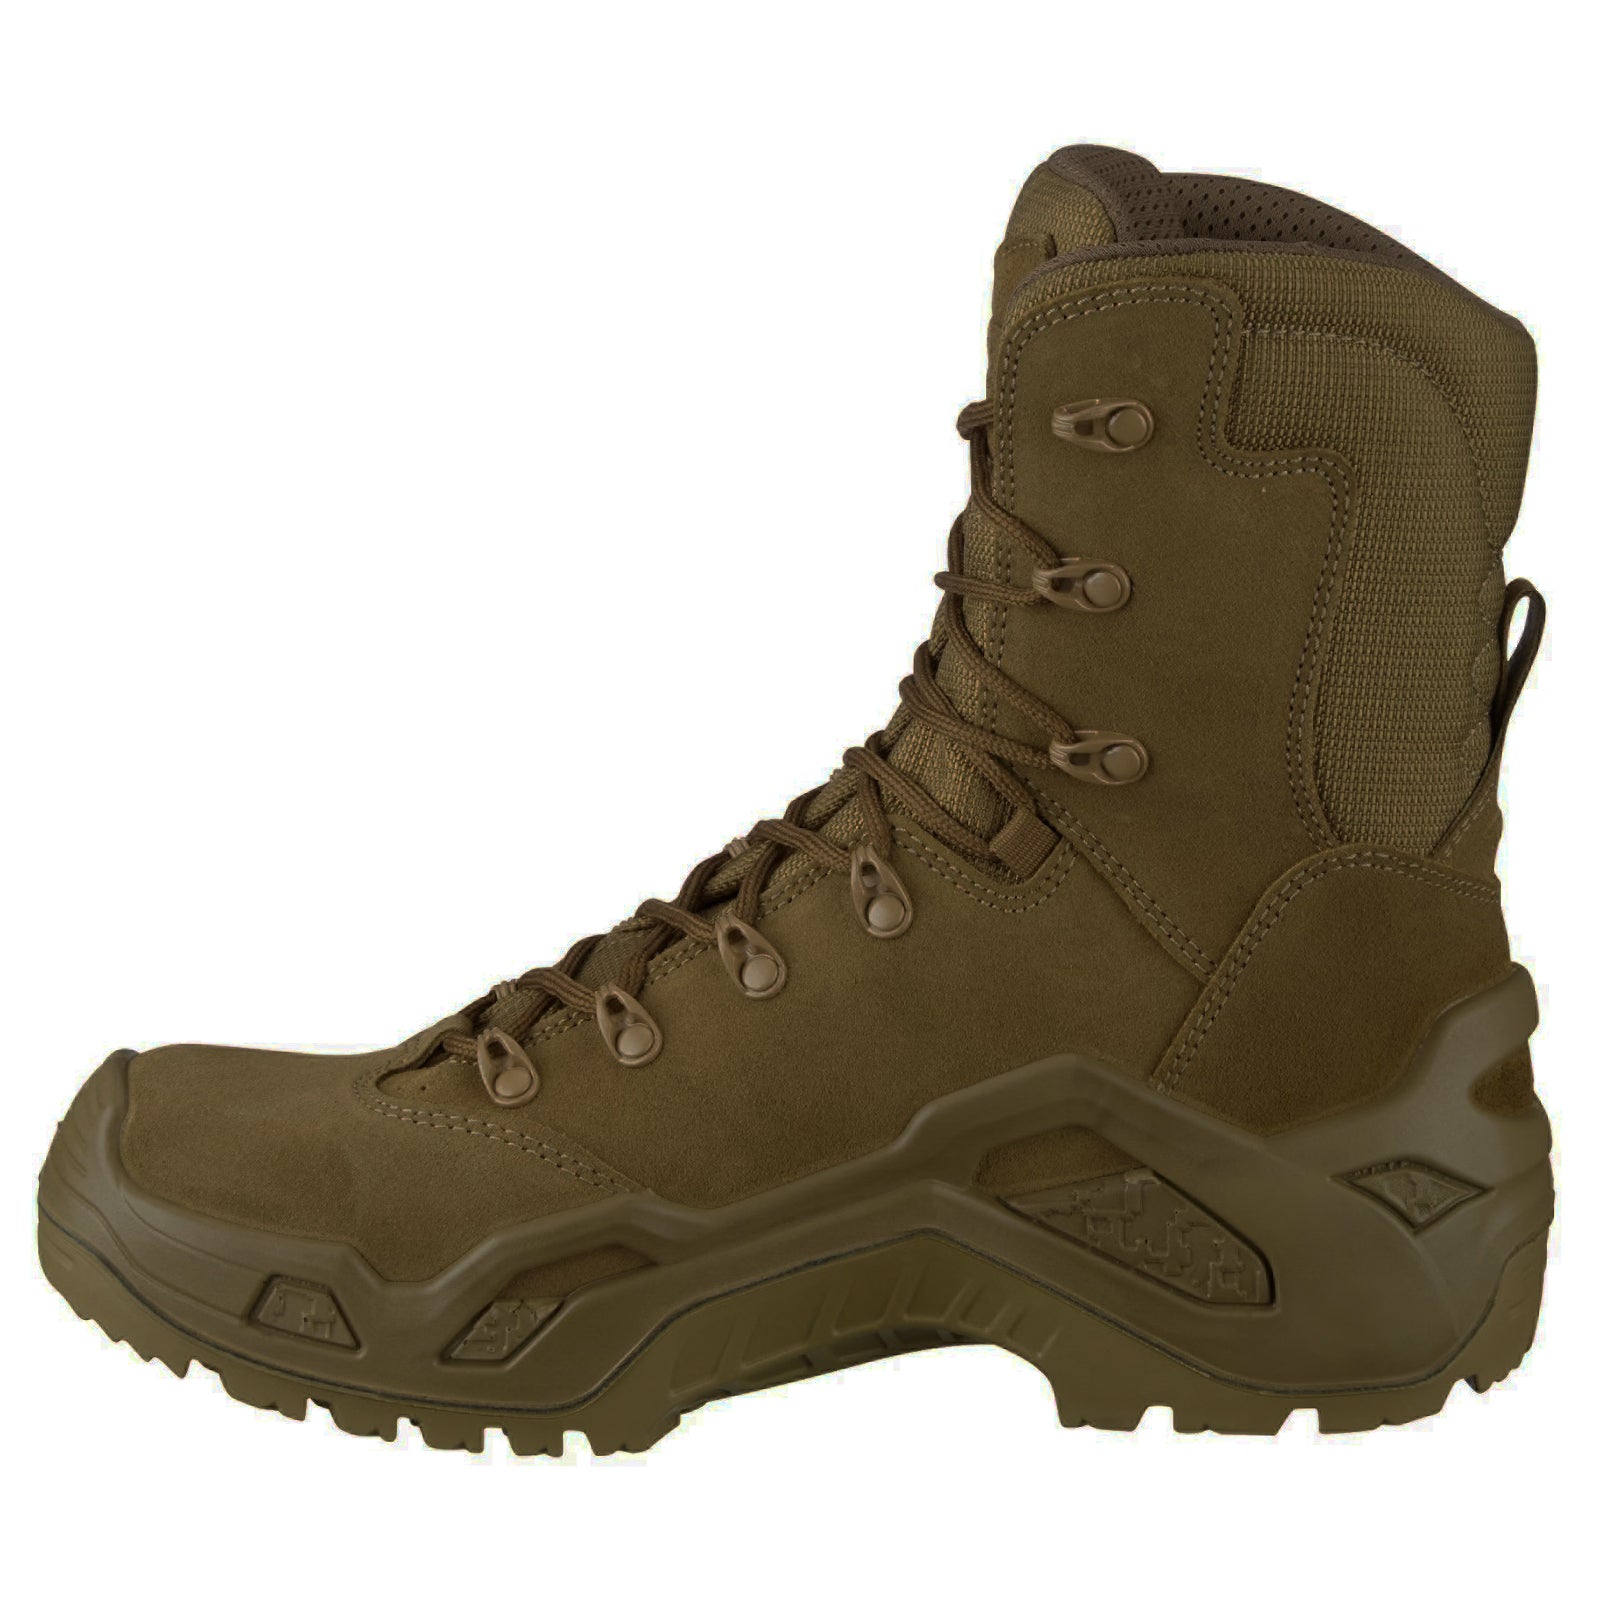 Z 8S Task Force Suede Men's Ankle Hiking Boots